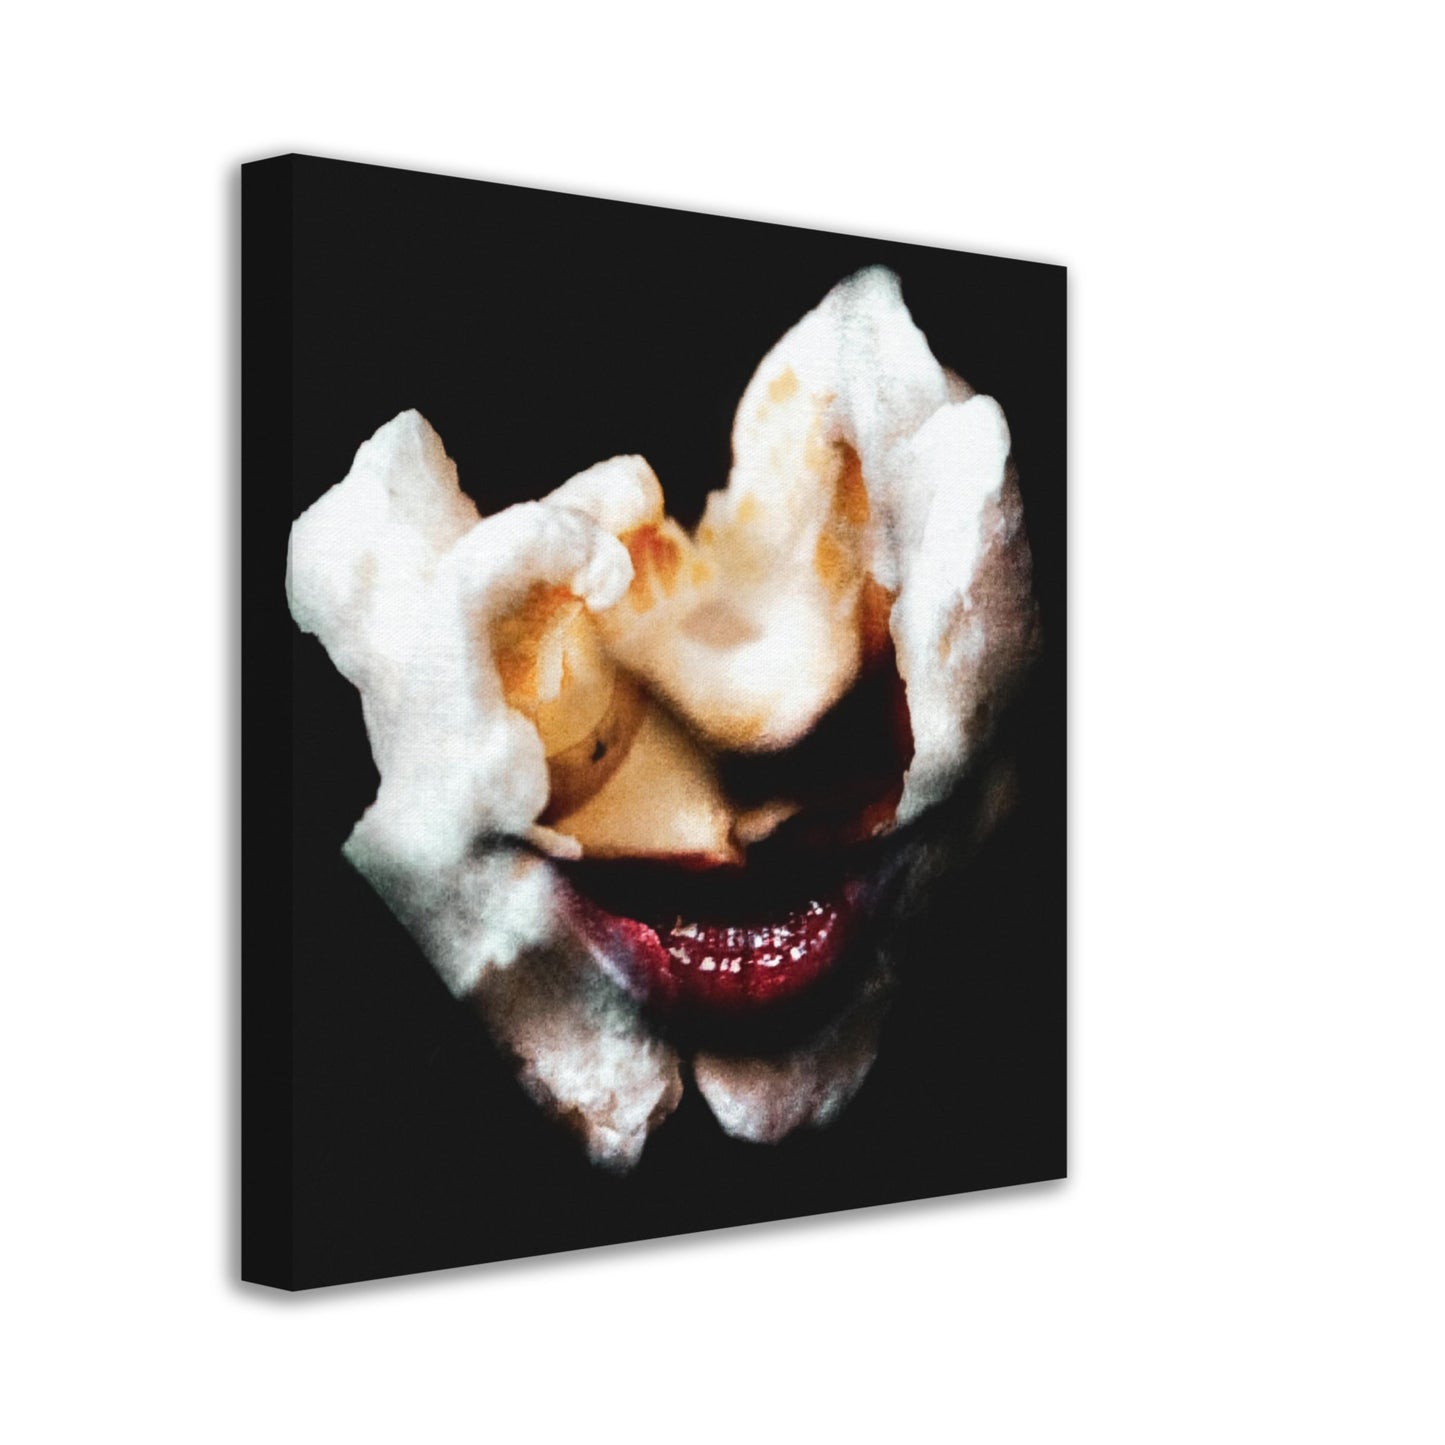 This Movement From Face To Thing - Canvas Print